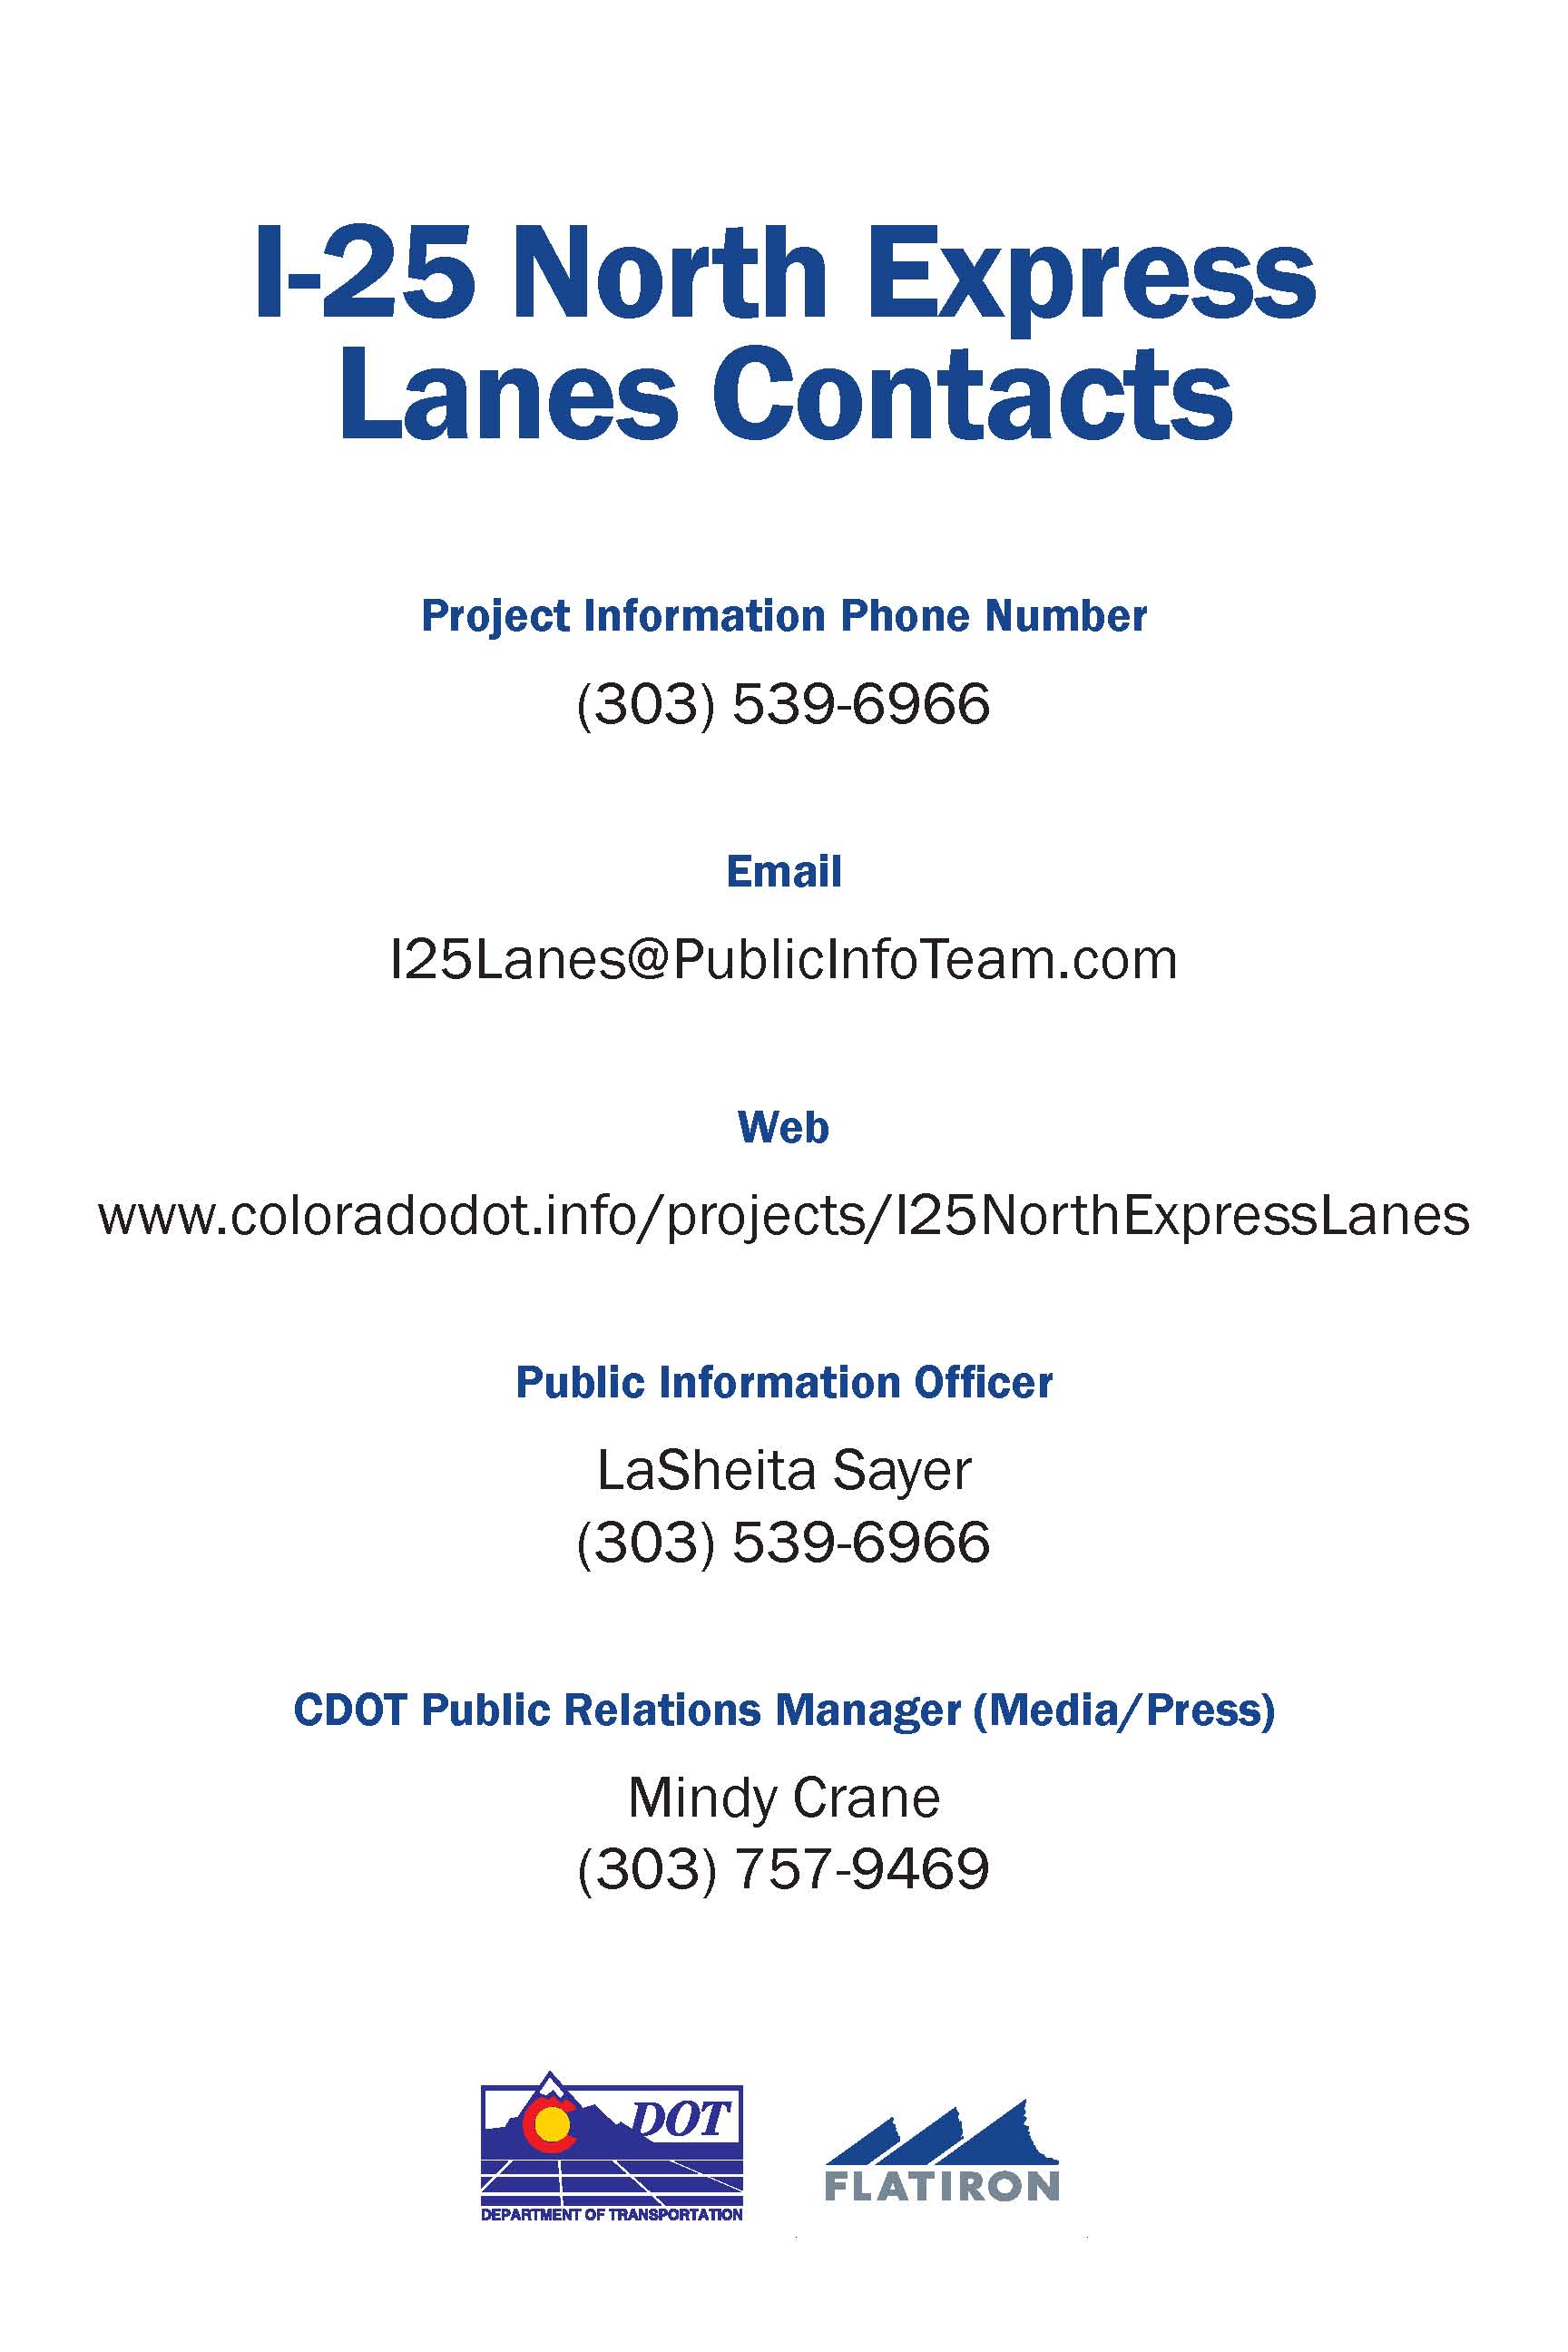 I25 North contact list detail image